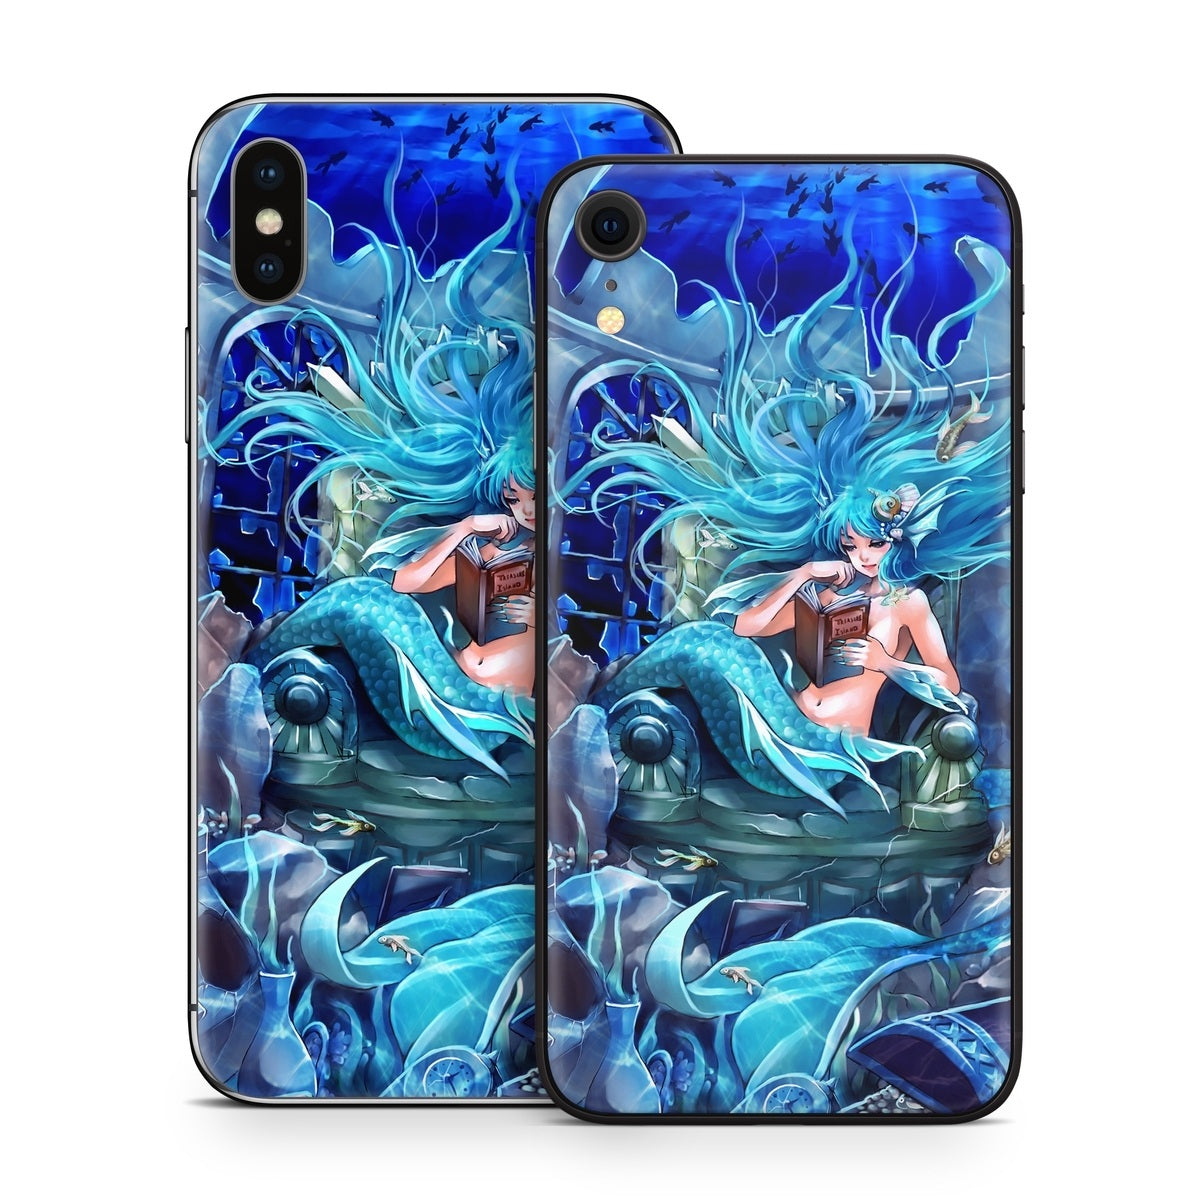 In Her Own World - Apple iPhone X Skin